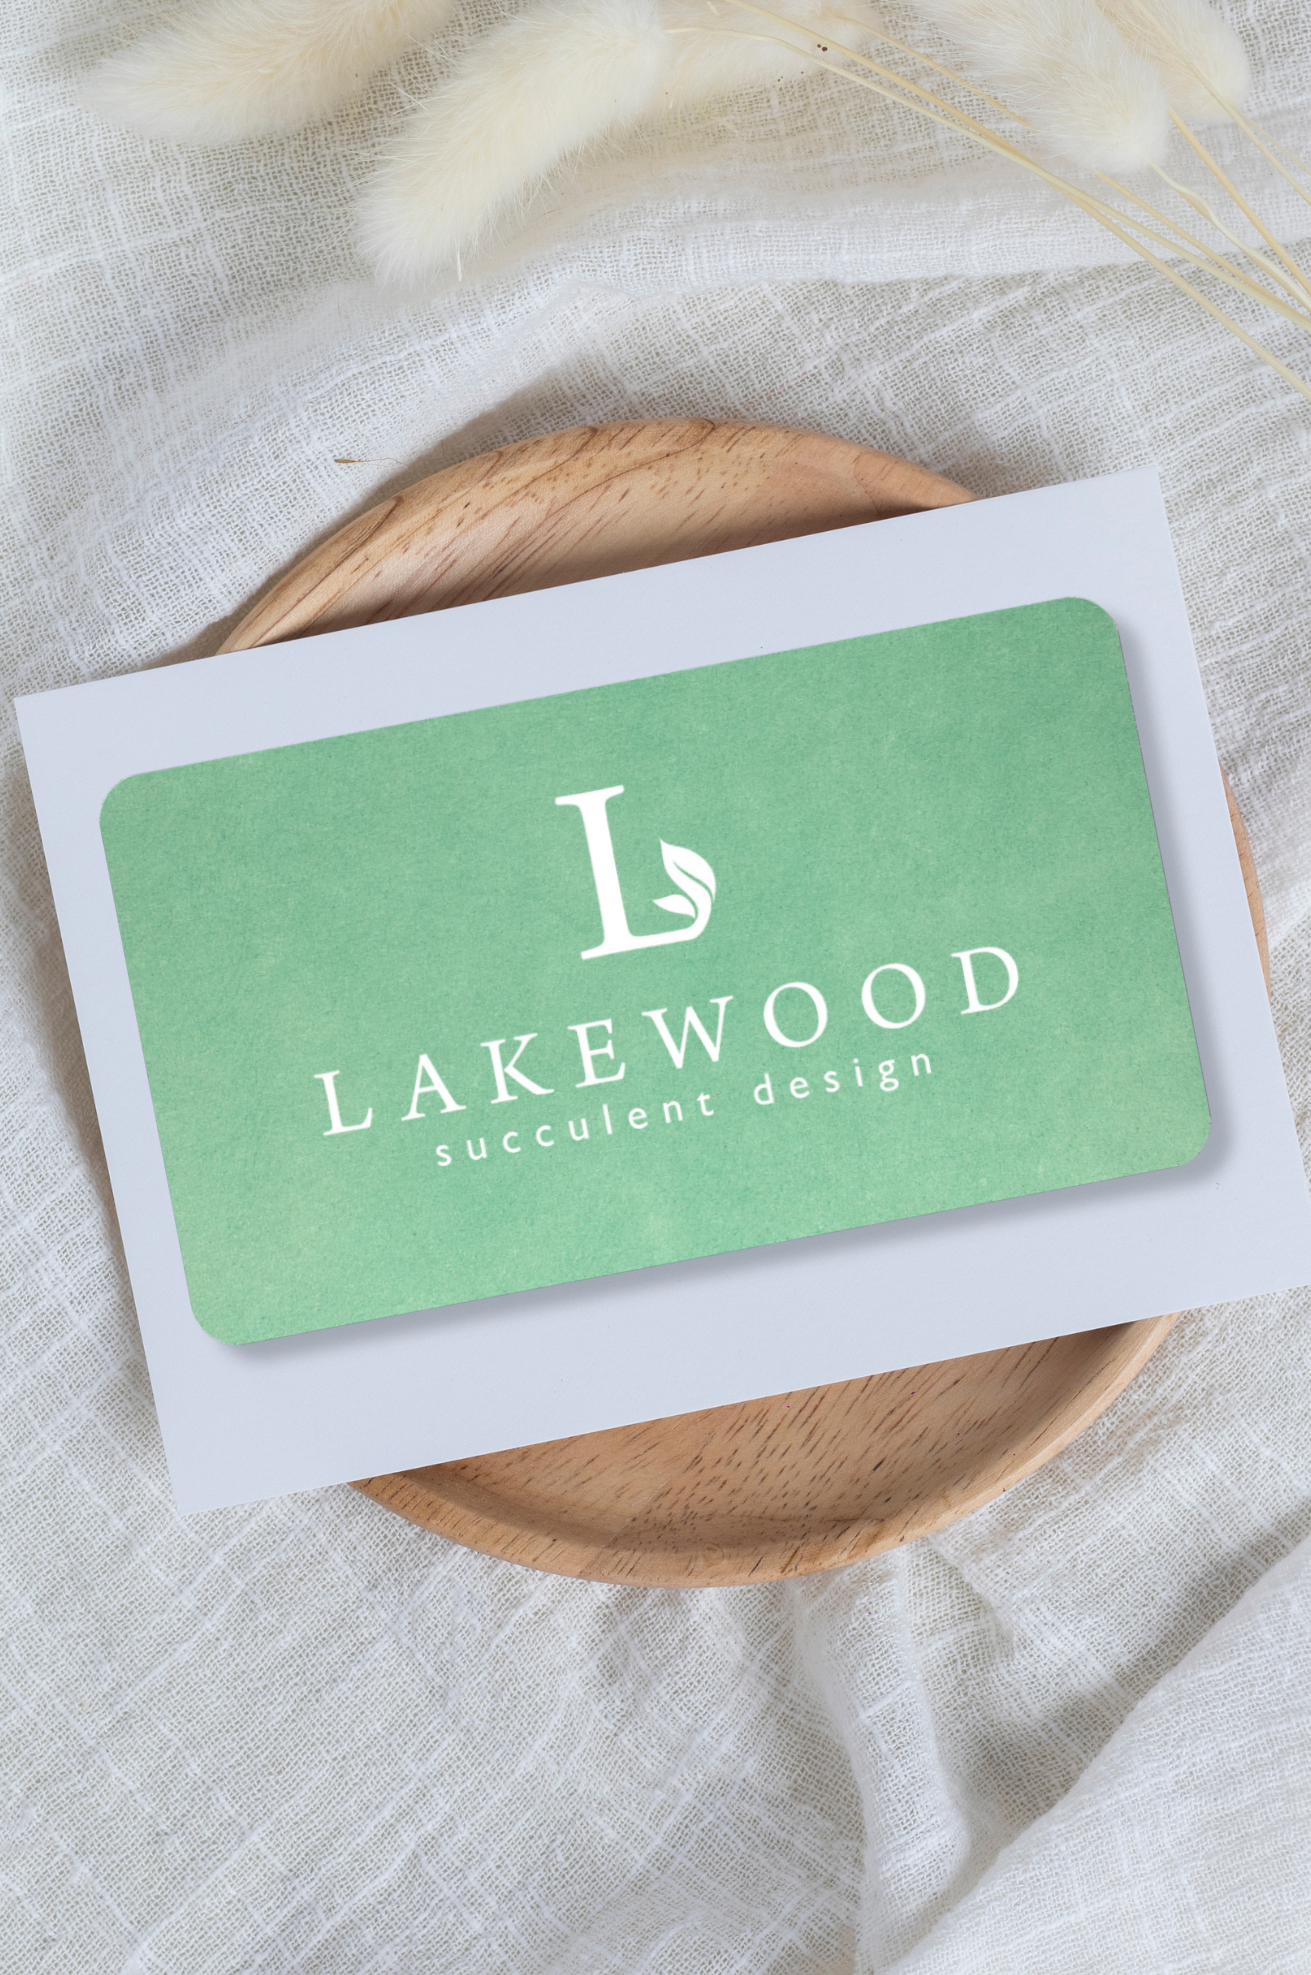 Sample image of an E-Gift Card for Lakewood Succulent Design. Gift Card will be digital and emailed (not a physical card).